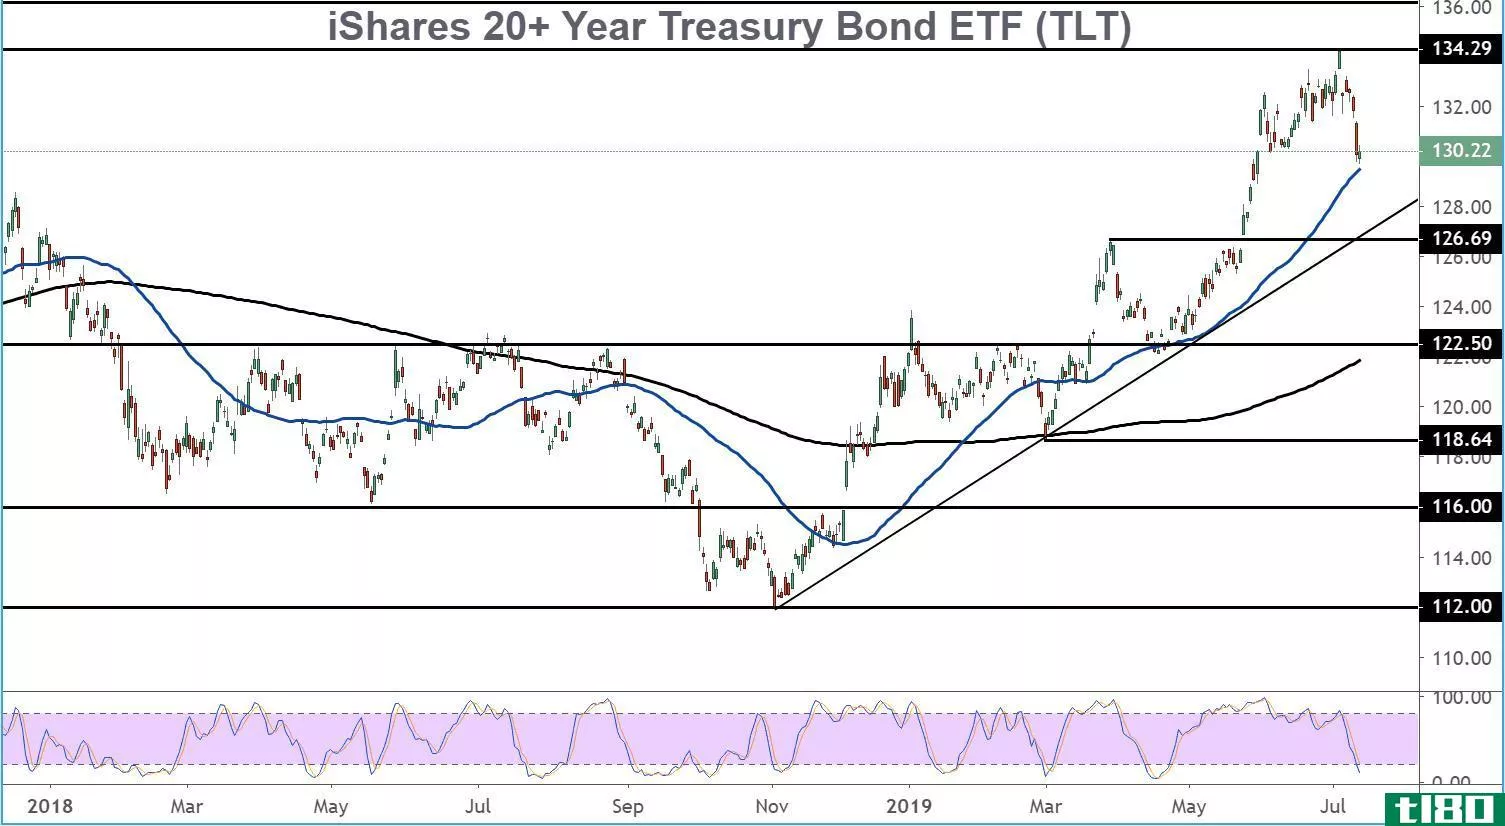 Chart showing the performance of the the iShares 20+ Year Treasury Bond ETF (TLT)